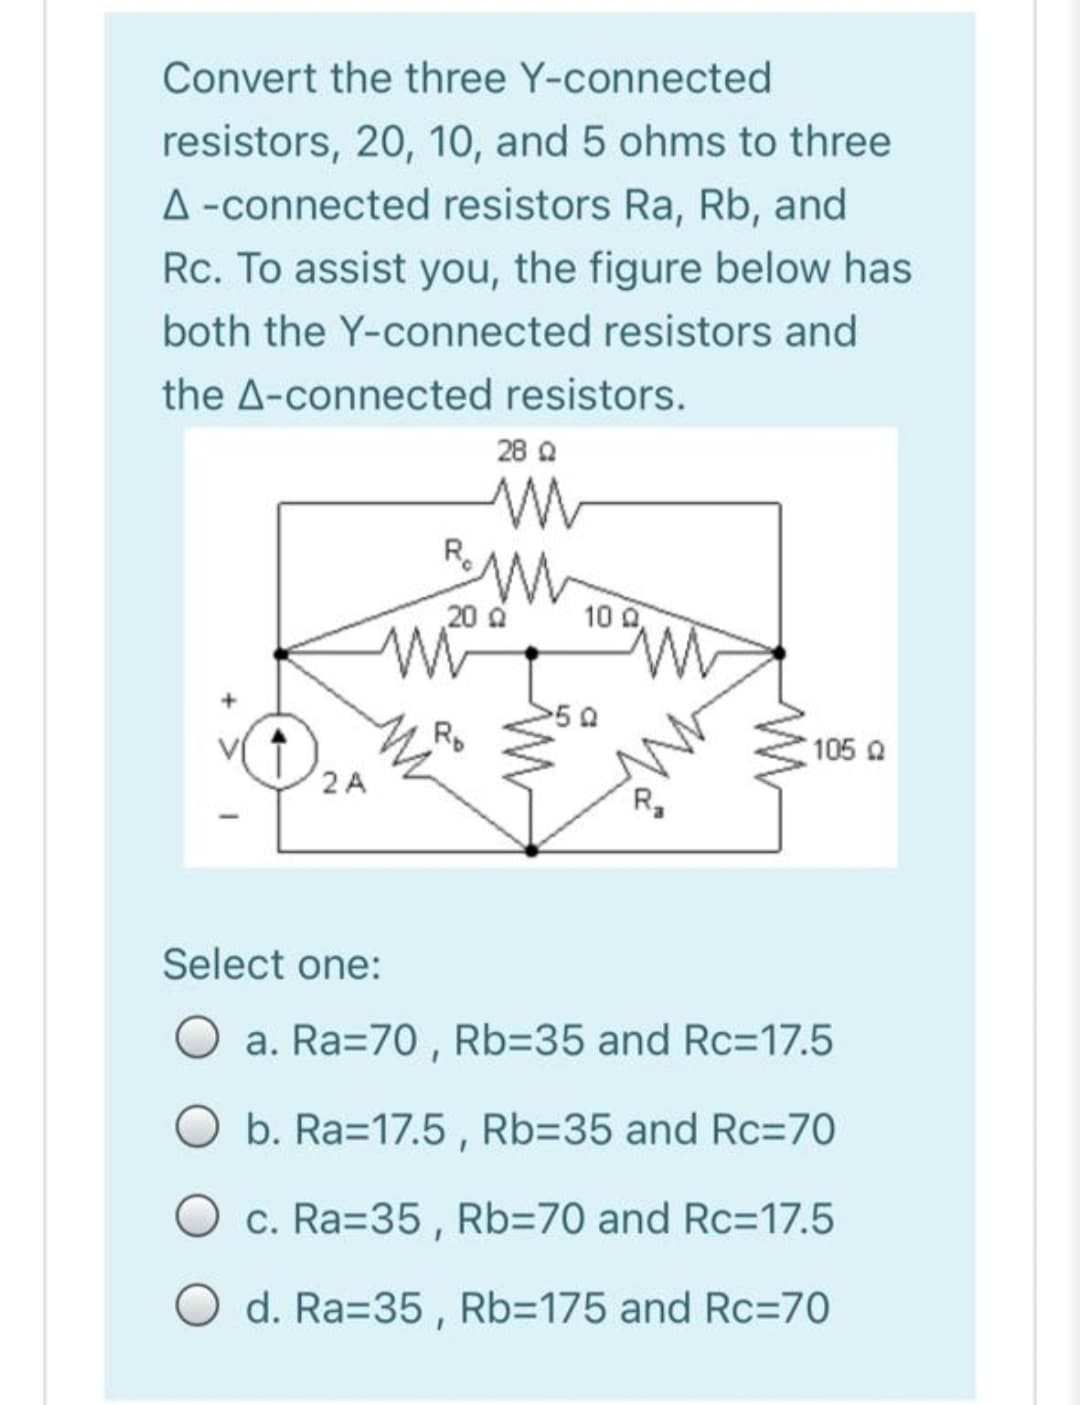 Convert the three Y-connected
resistors, 20, 10, and 5 ohms to three
A -connected resistors Ra, Rb, and
Rc. To assist you, the figure below has
both the Y-connected resistors and
the A-connected resistors.
28 A
R.
20 0
10 0
Rp
105 Q
2 A
R,
Select one:
a. Ra=70 , Rb=35 and Rc=17.5
Ob. Ra=17.5, Rb=35 and Rc=70
c. Ra=35 , Rb370 and Rc=17.5
O d. Ra=35 , Rb3175 and Rc=70
